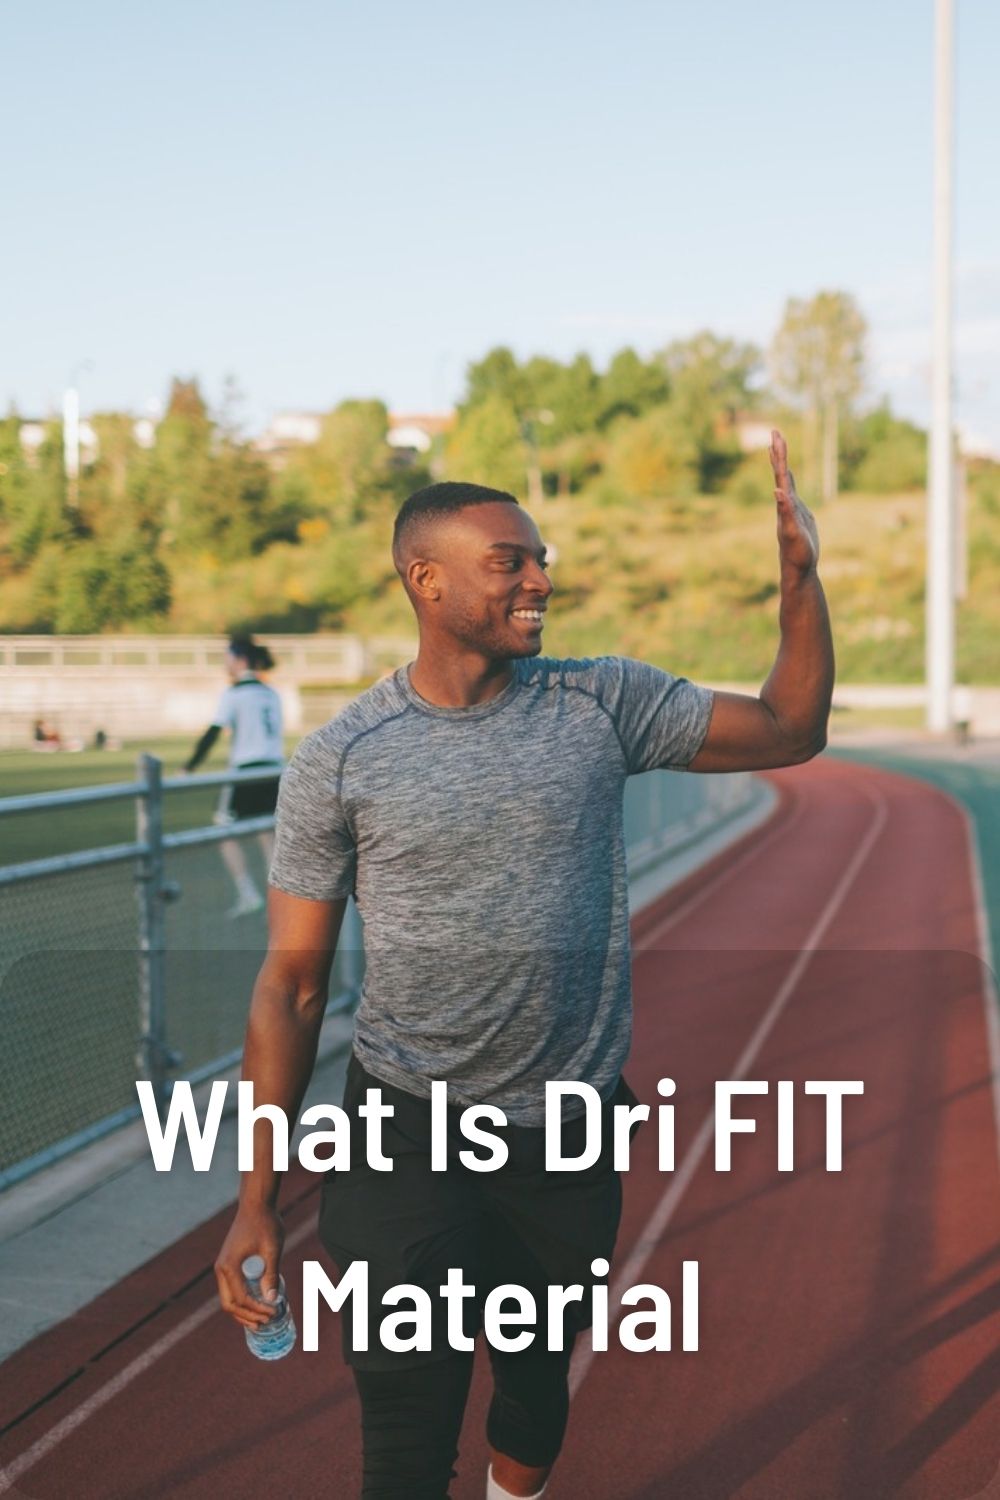 What Is Dri FIT Material